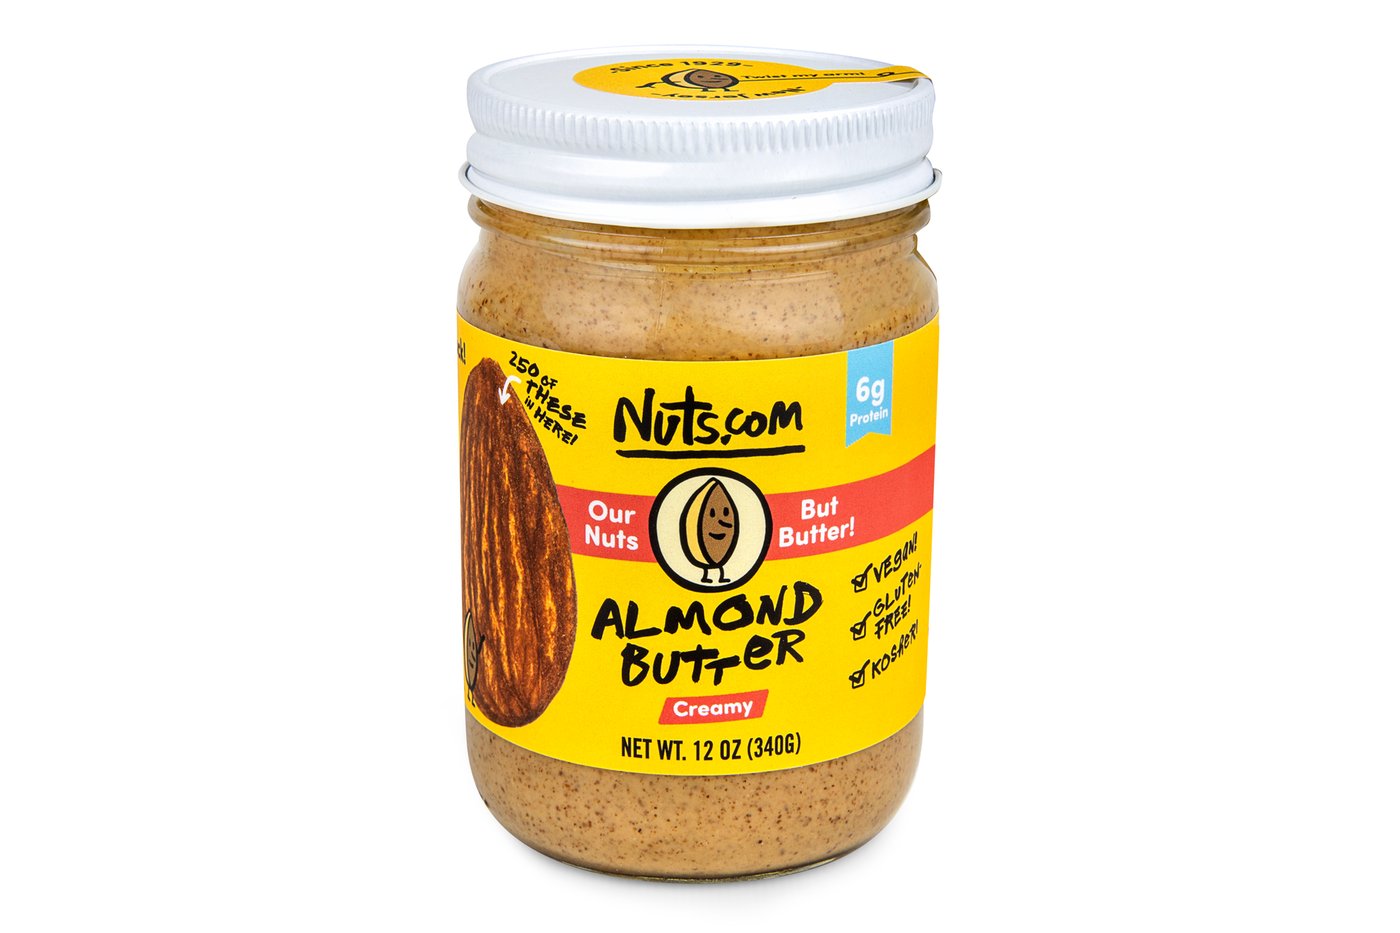 Almond Butter (Roasted, Smooth) image zoom